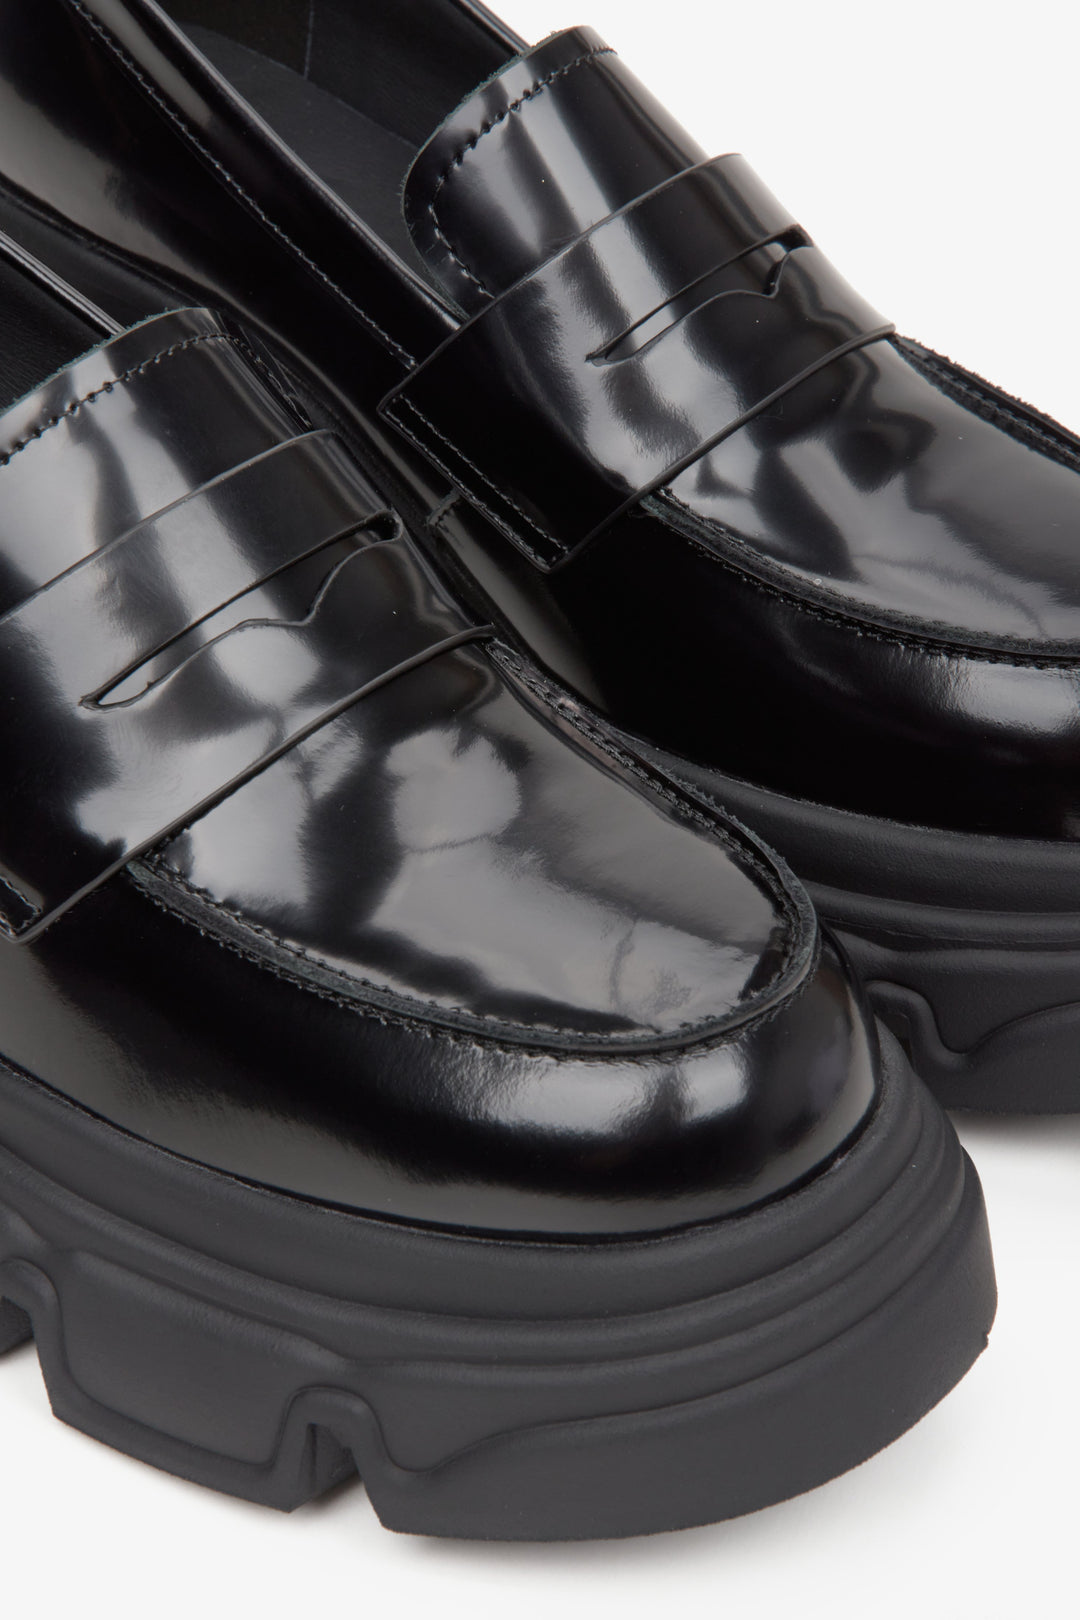 Women's black leather moccasins with a thick sole by Estro - close-up on details.